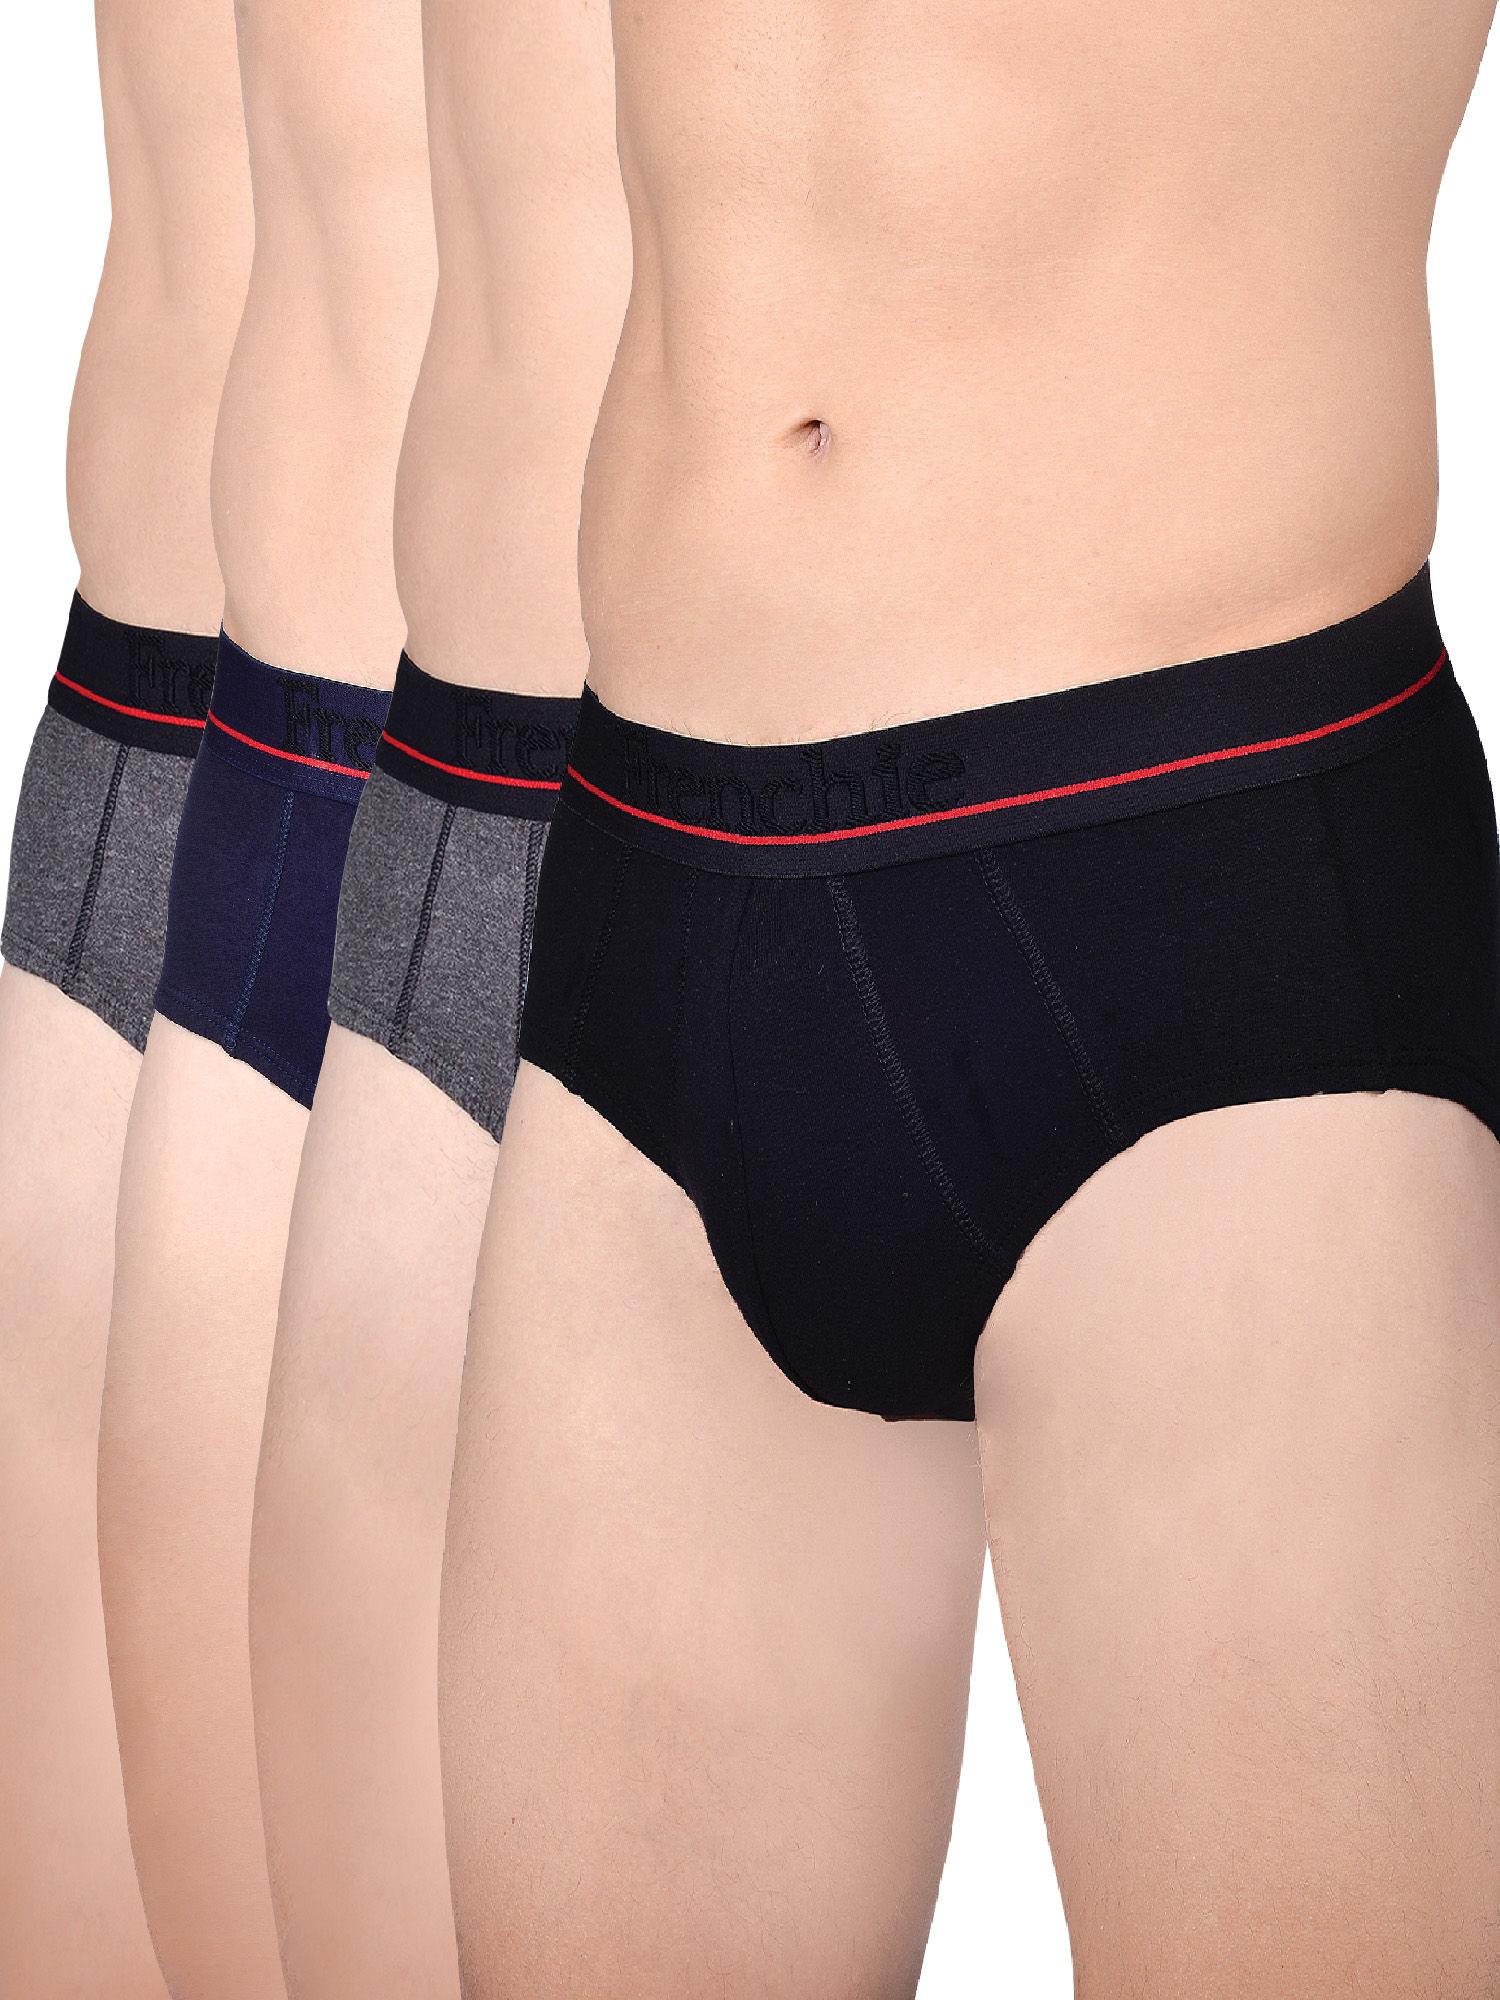 casuals-4003-mens-cotton-briefs-assorted-colours-(pack-of-4)